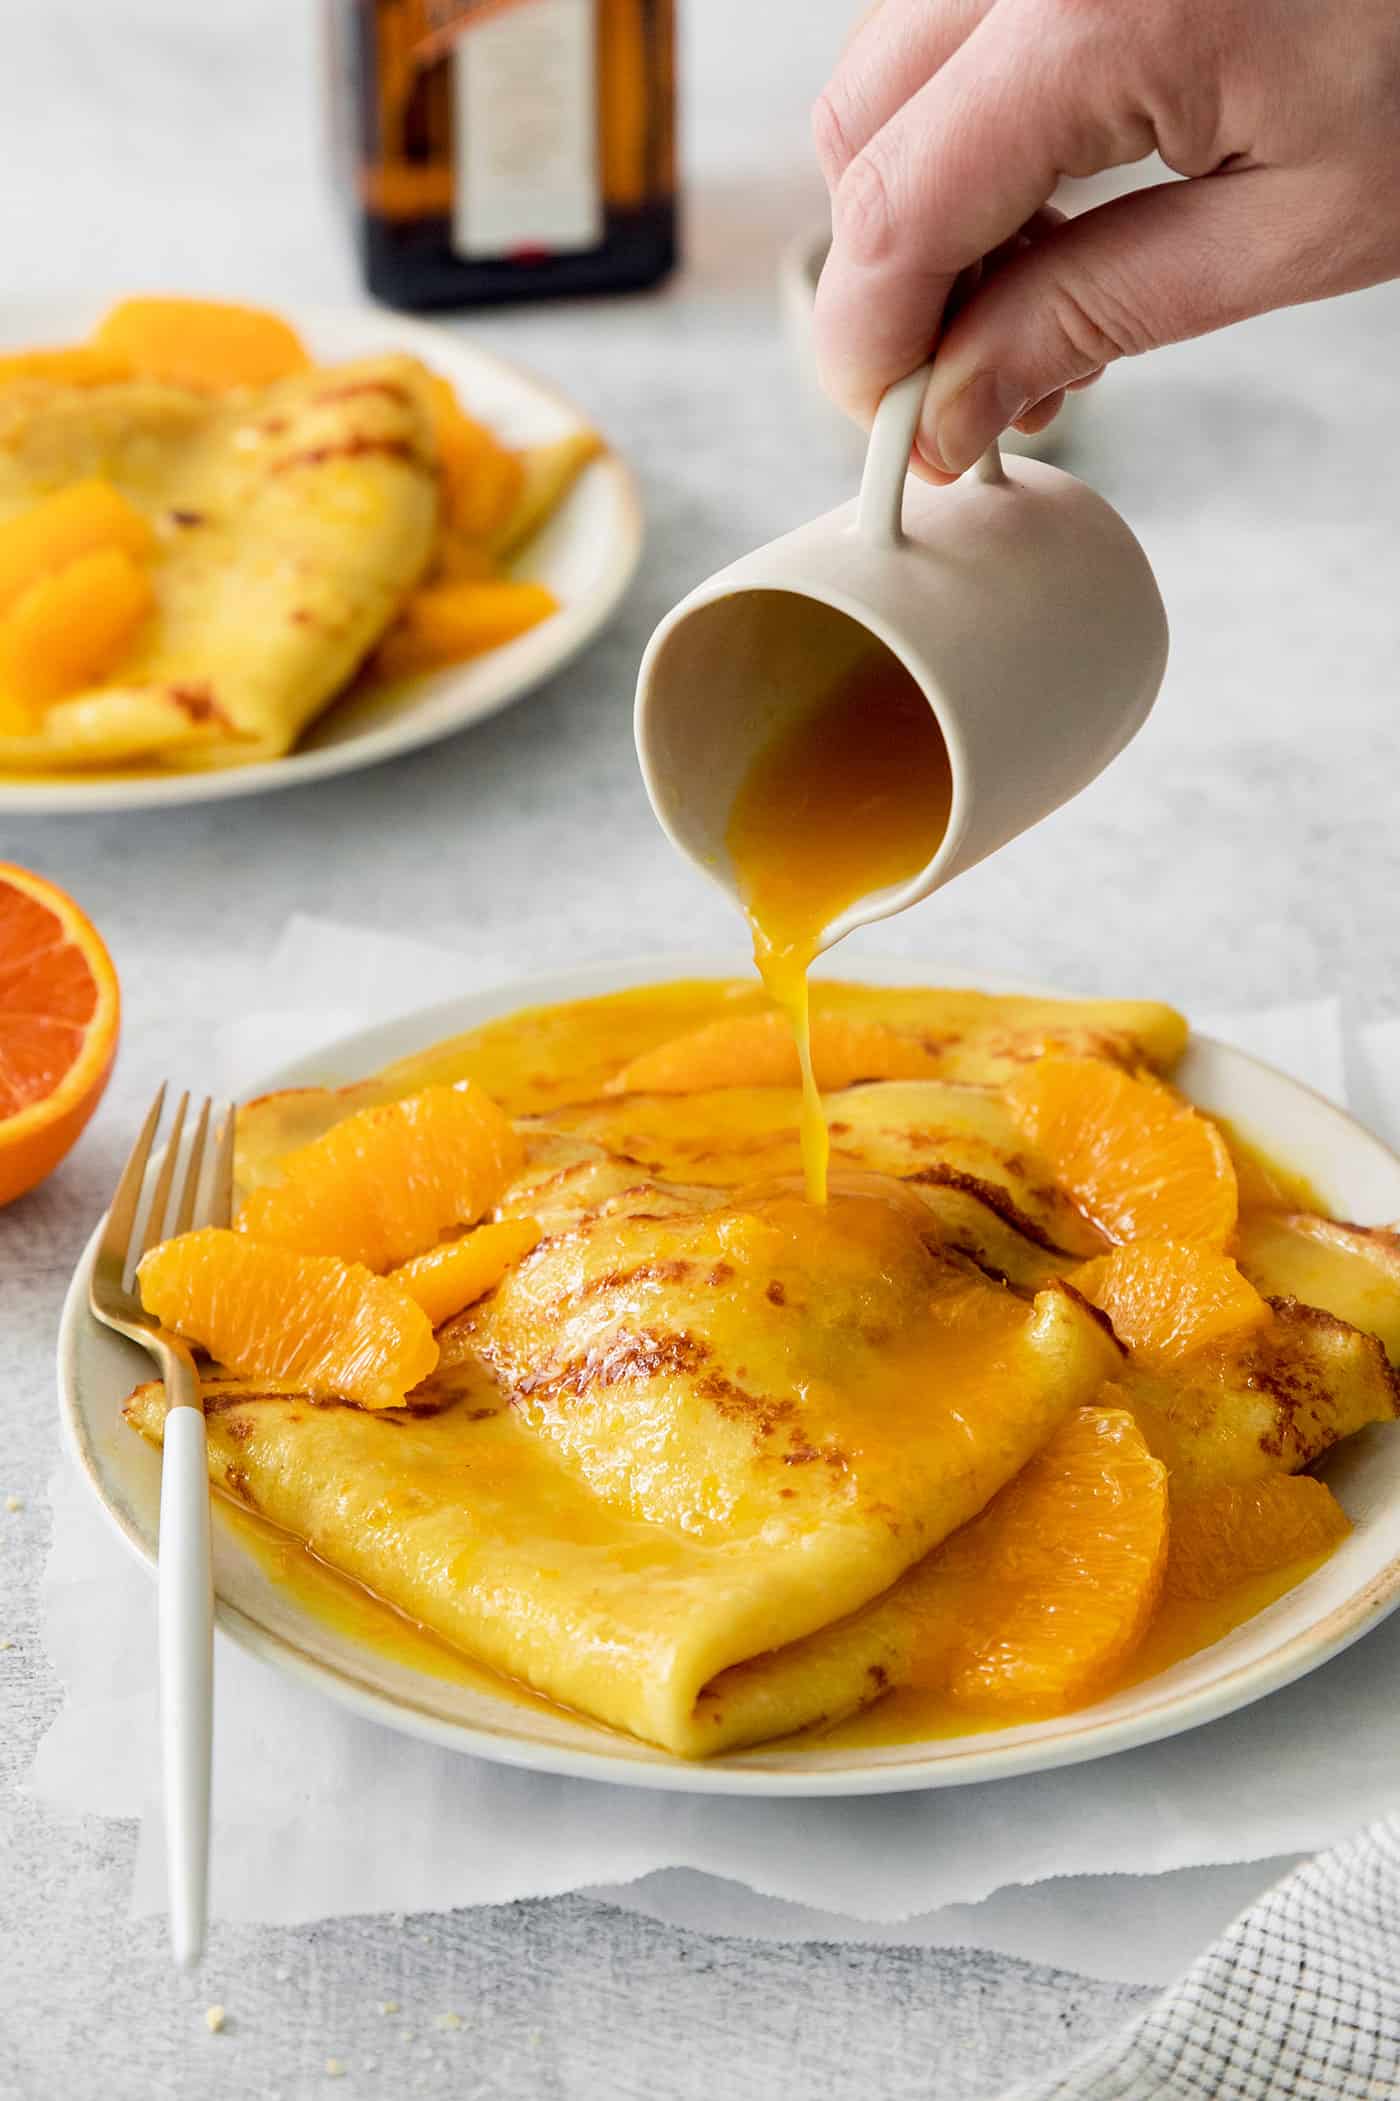 A hand pours a pitcher of orange sauce over a plate of crepes Suzette.